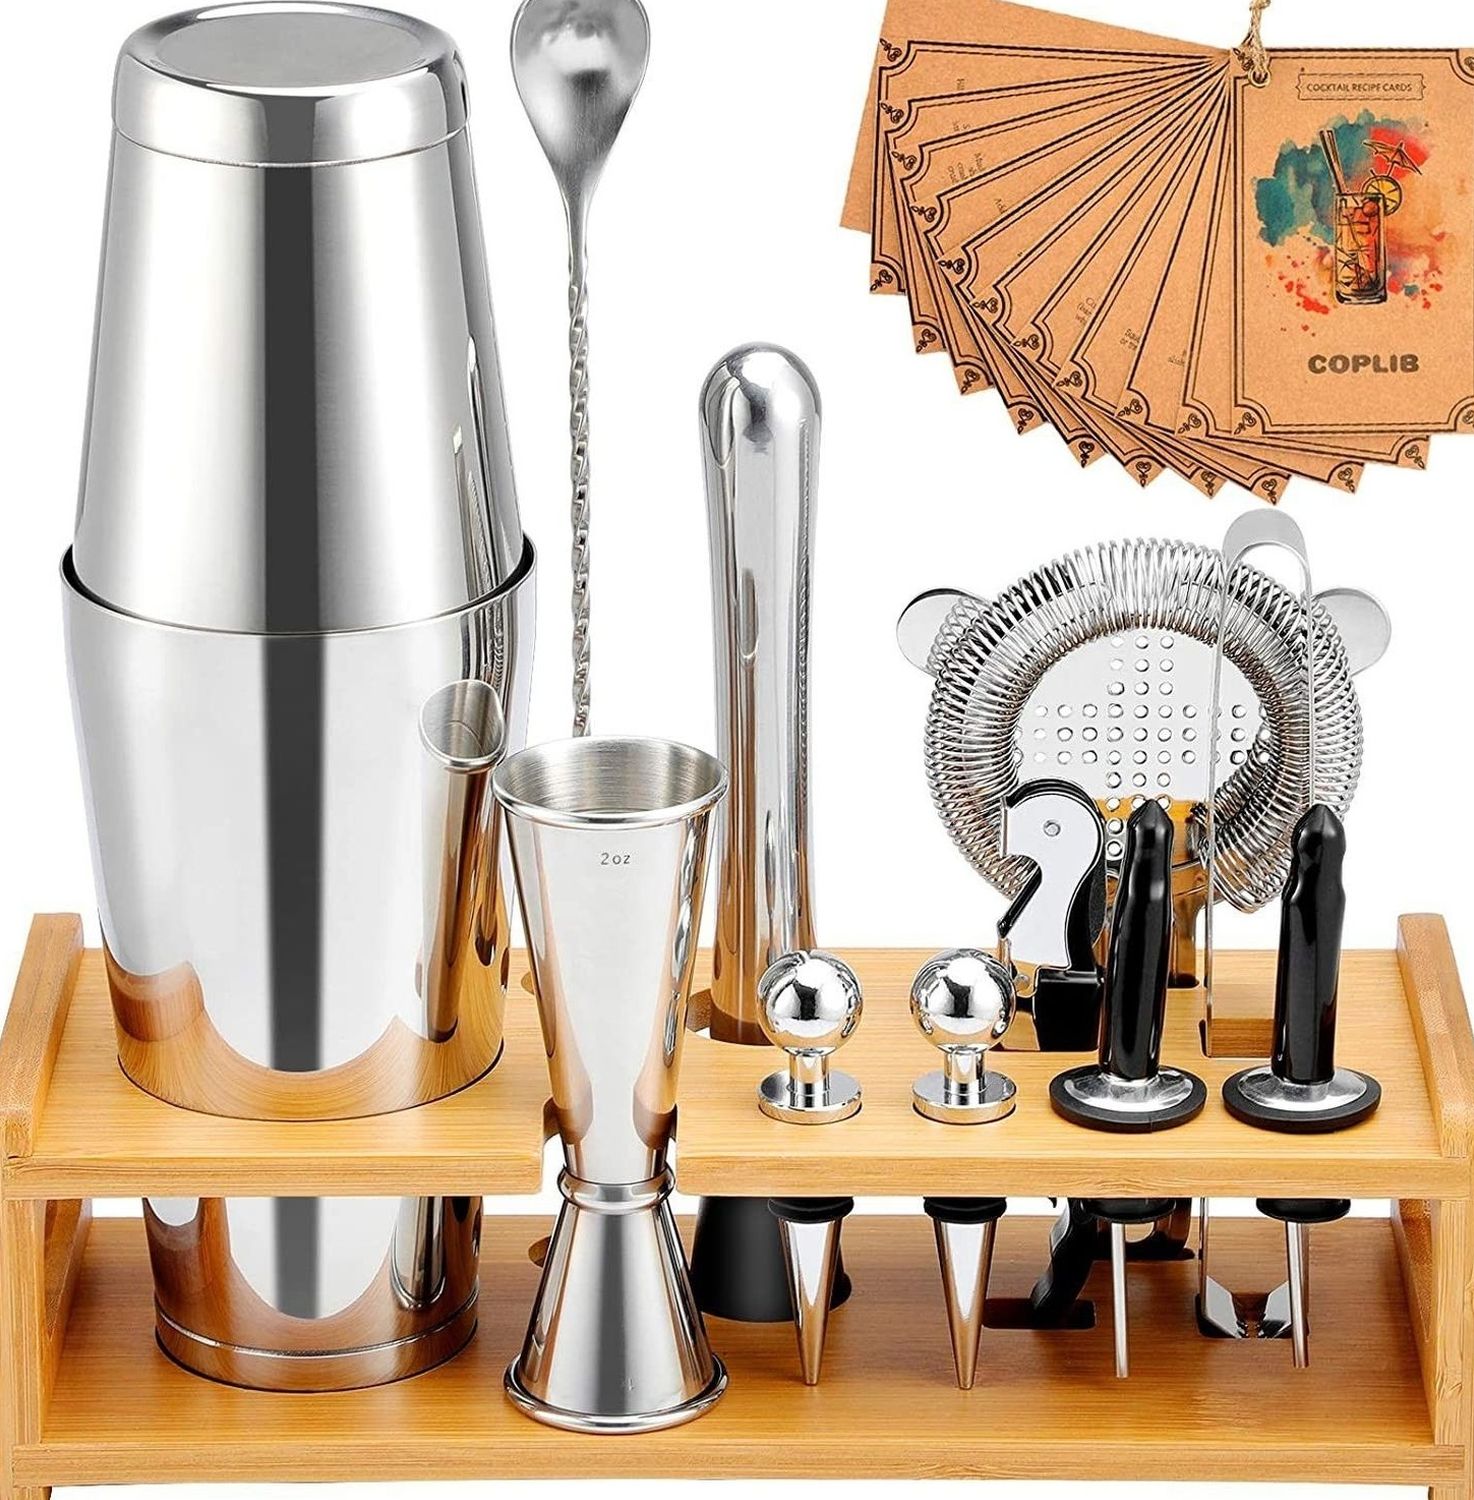 13 Pcs Rustproof Bartender Kit Cocktail Shaker Set with Stylish Stand, 304 Stainless Steel Bar Sets with 18-25oz Thicker Shaker